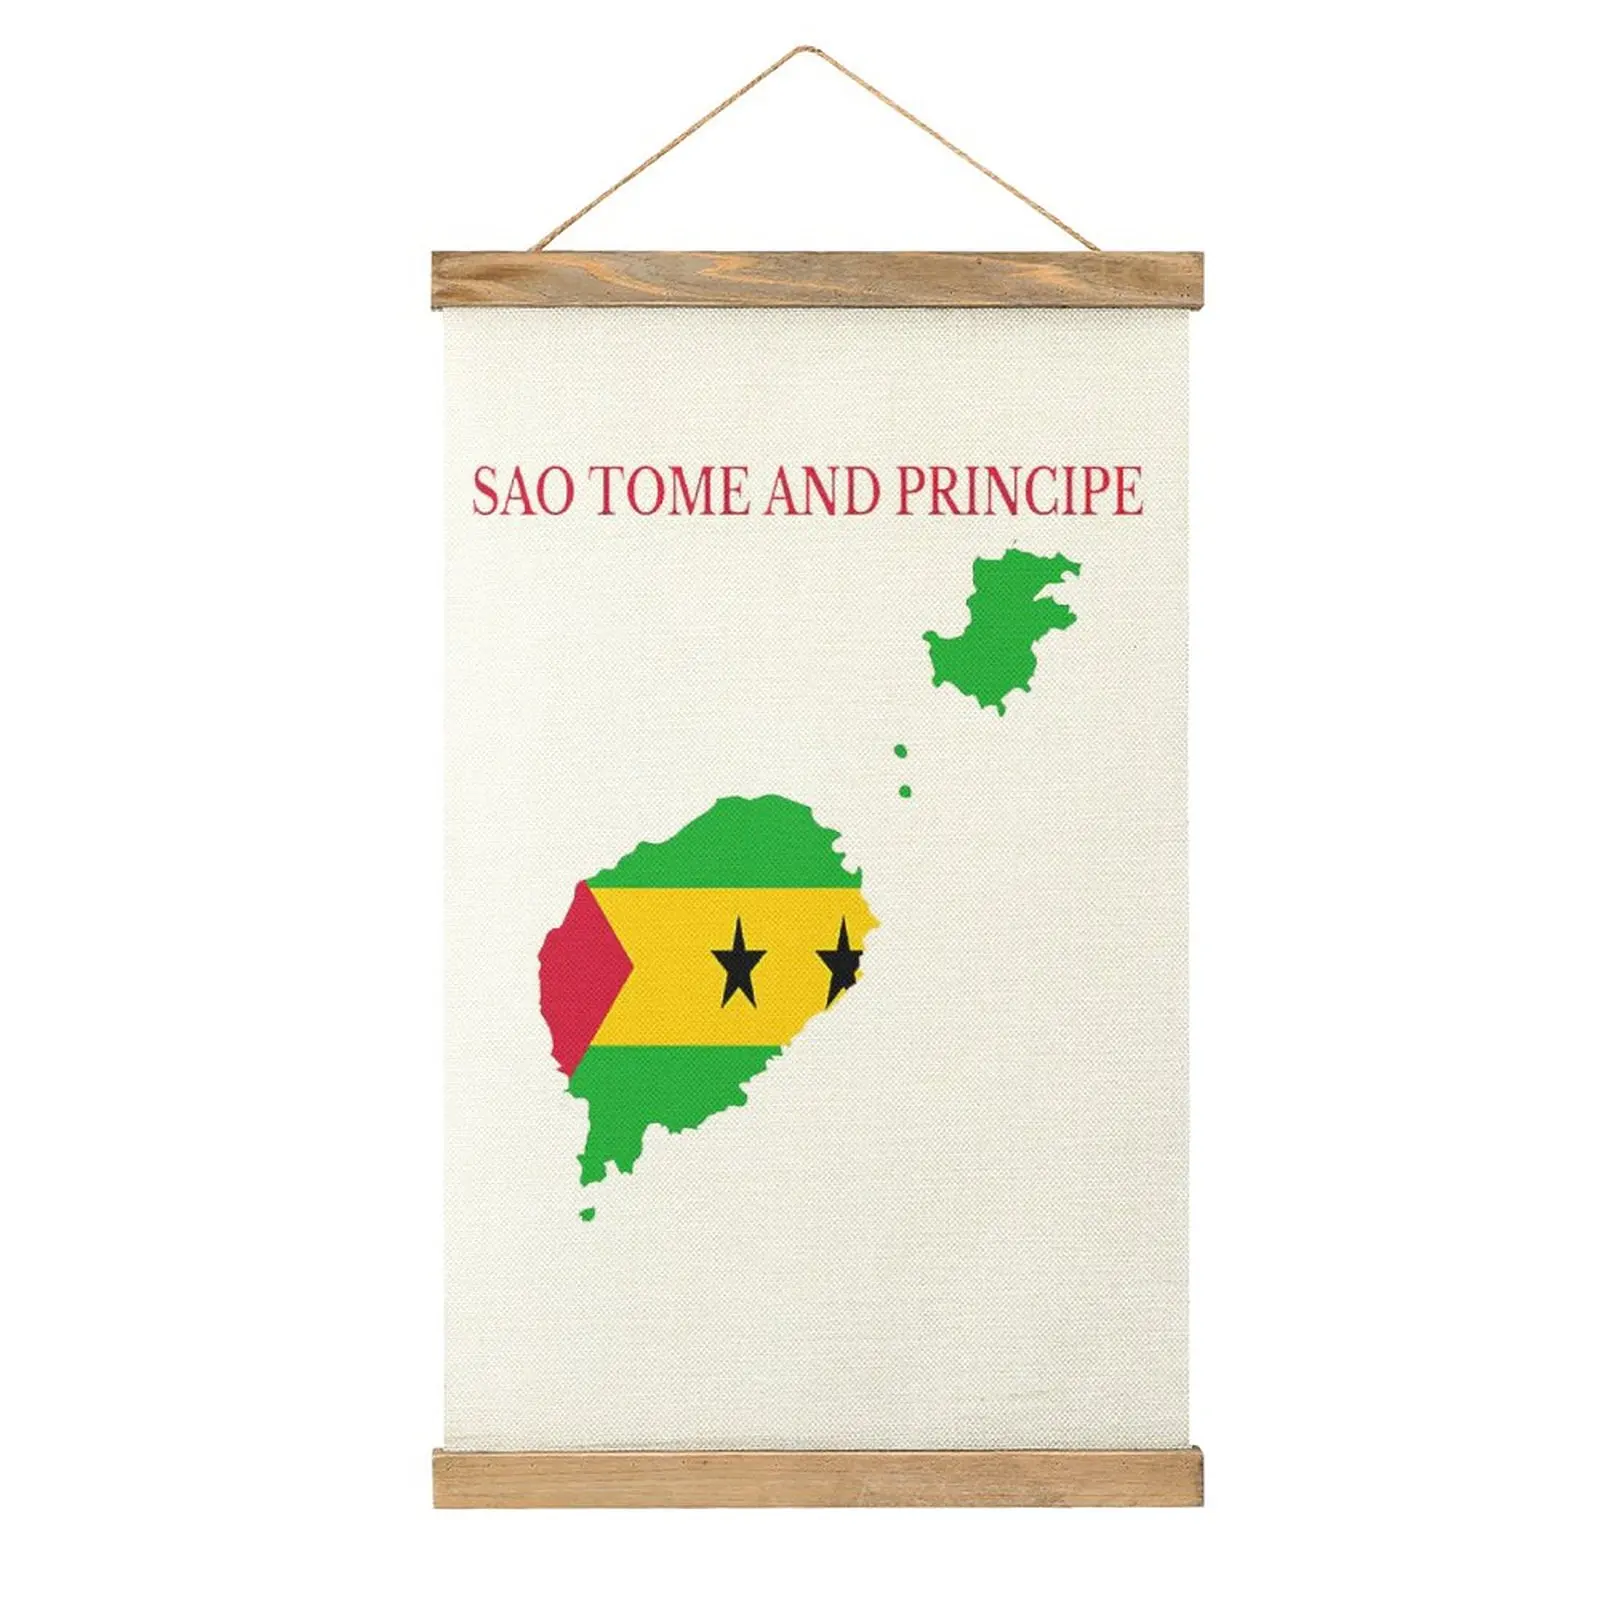 

Canvas Hanging Picture Sao Tome And Principe Flag Map Hot Sale Funny Novelty Picture Restaurant Wall Decoration Style Decorate